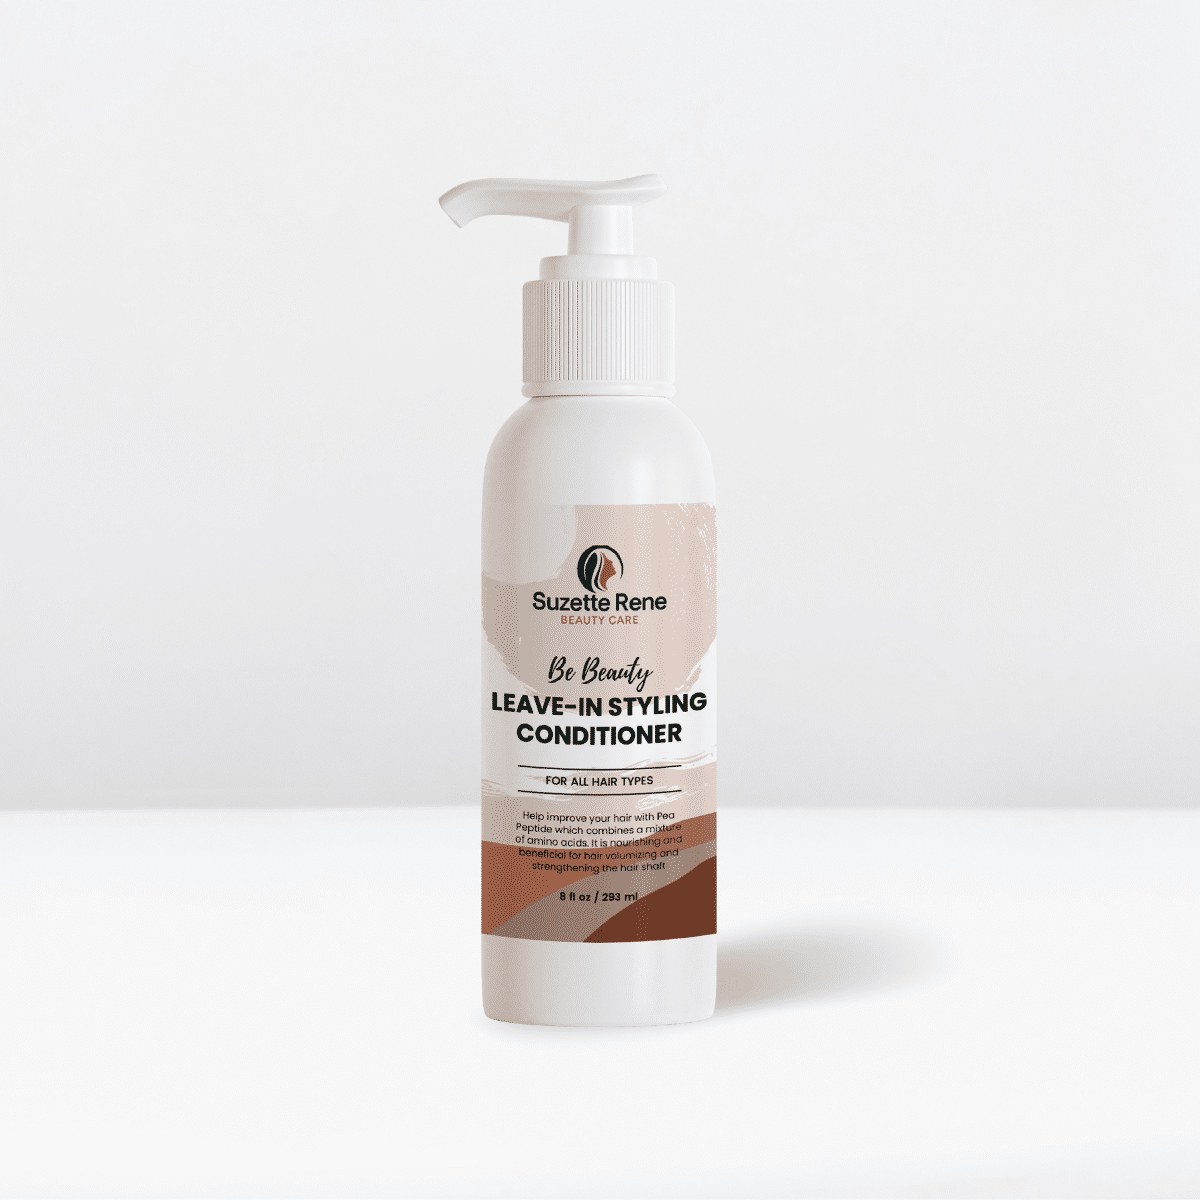 Leave-in Styling Conditioner